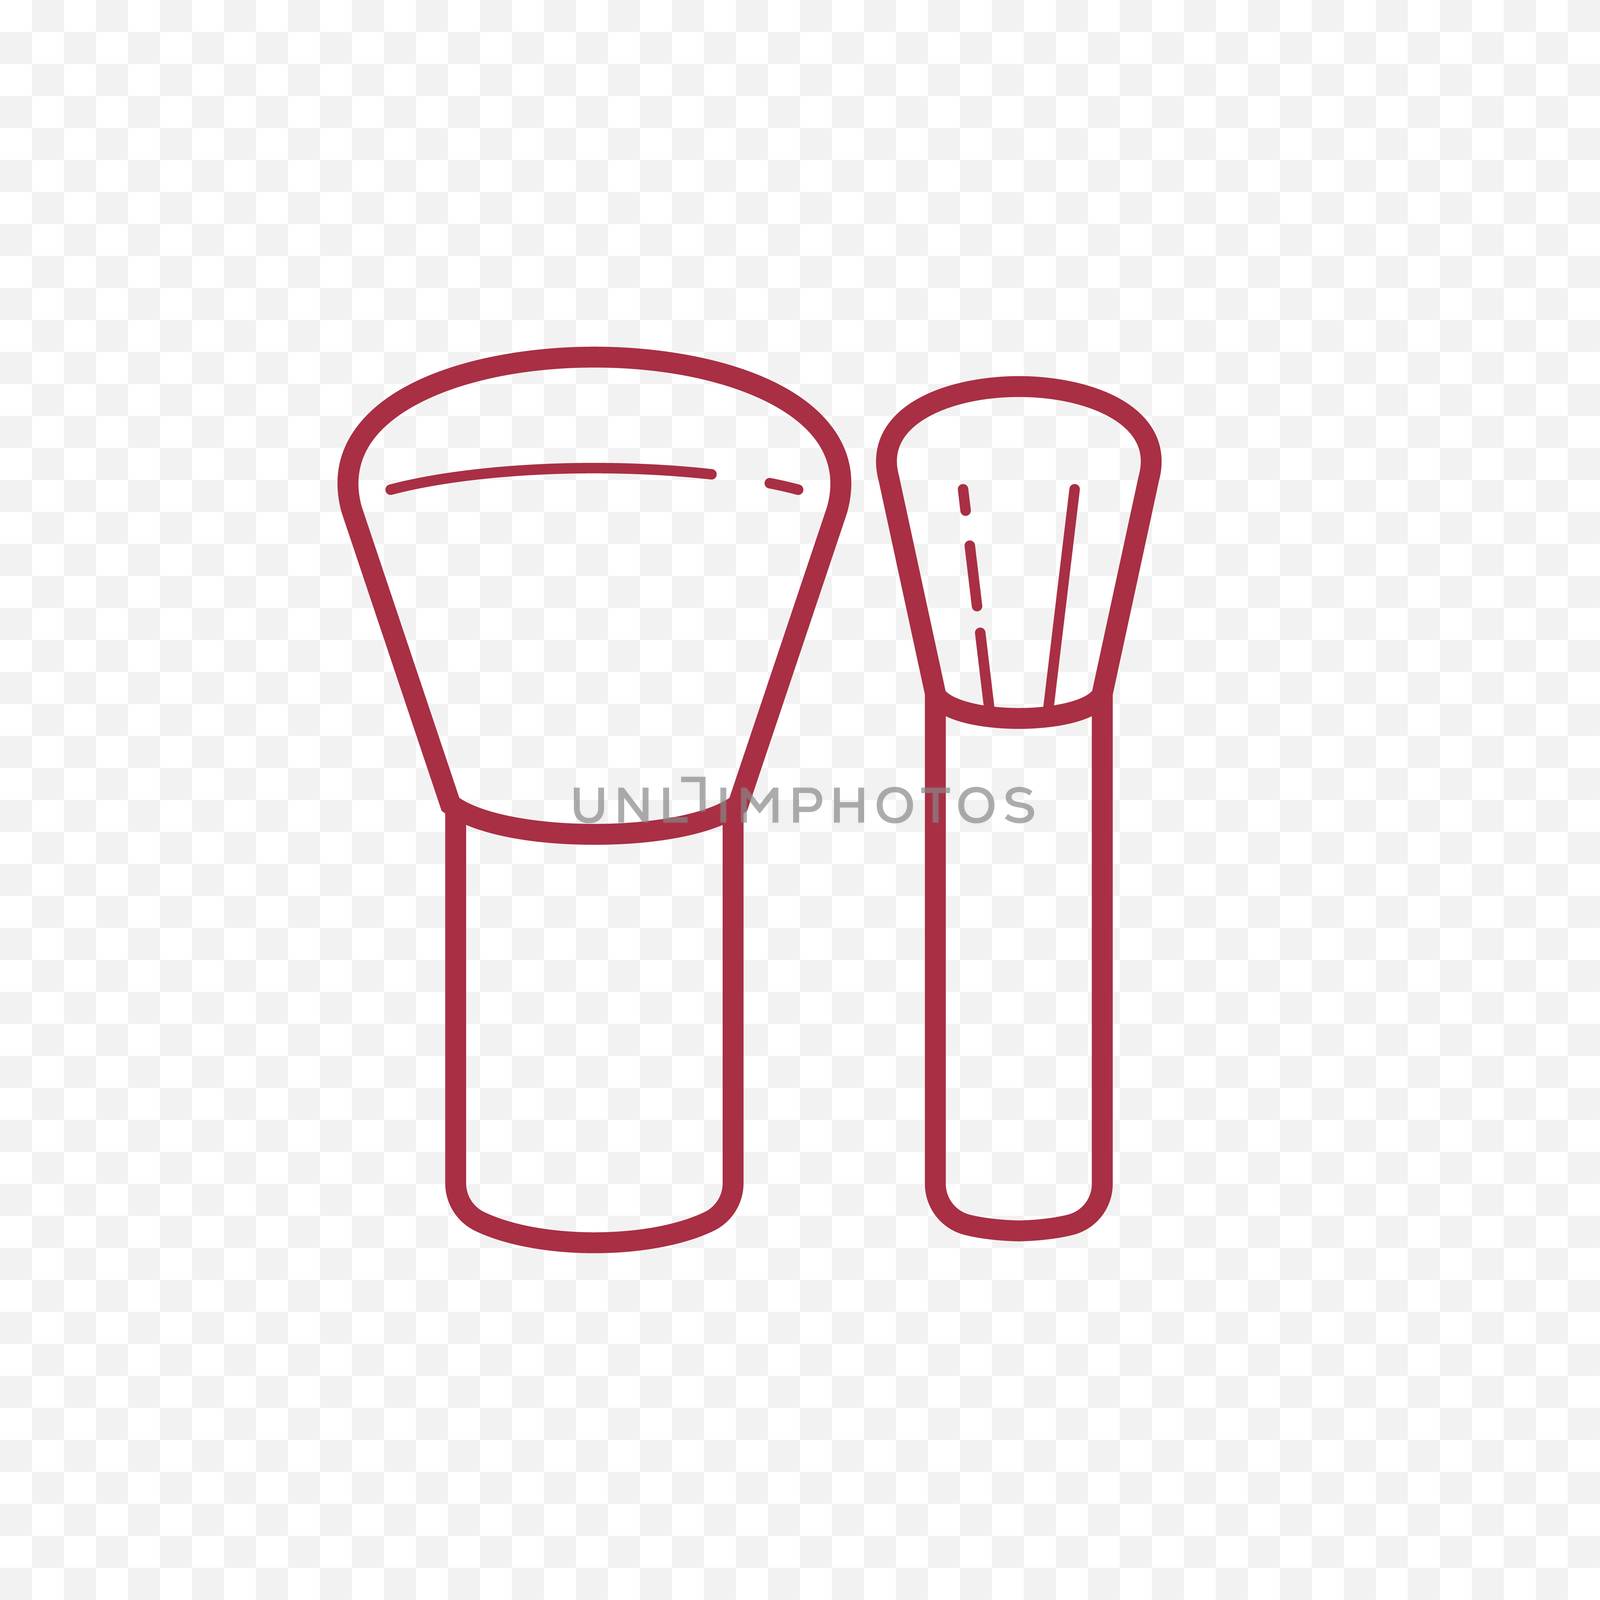 Makeup brush line icon. Cosmetic accessory brush thin linear signs for makeup and visage.